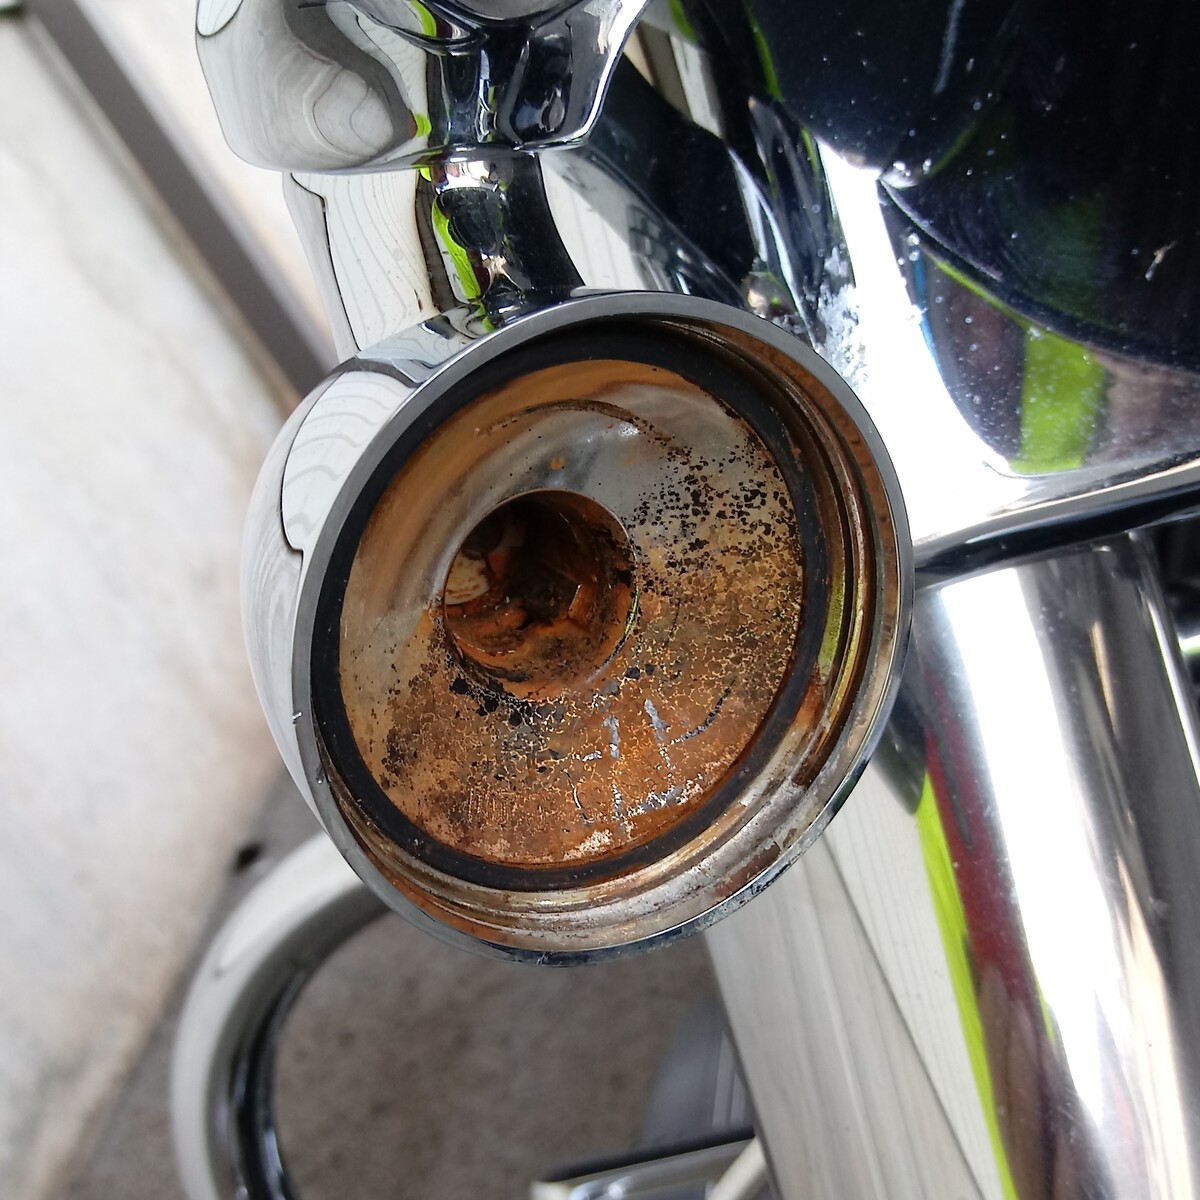 How To Clean Corrosion Off Light Socket